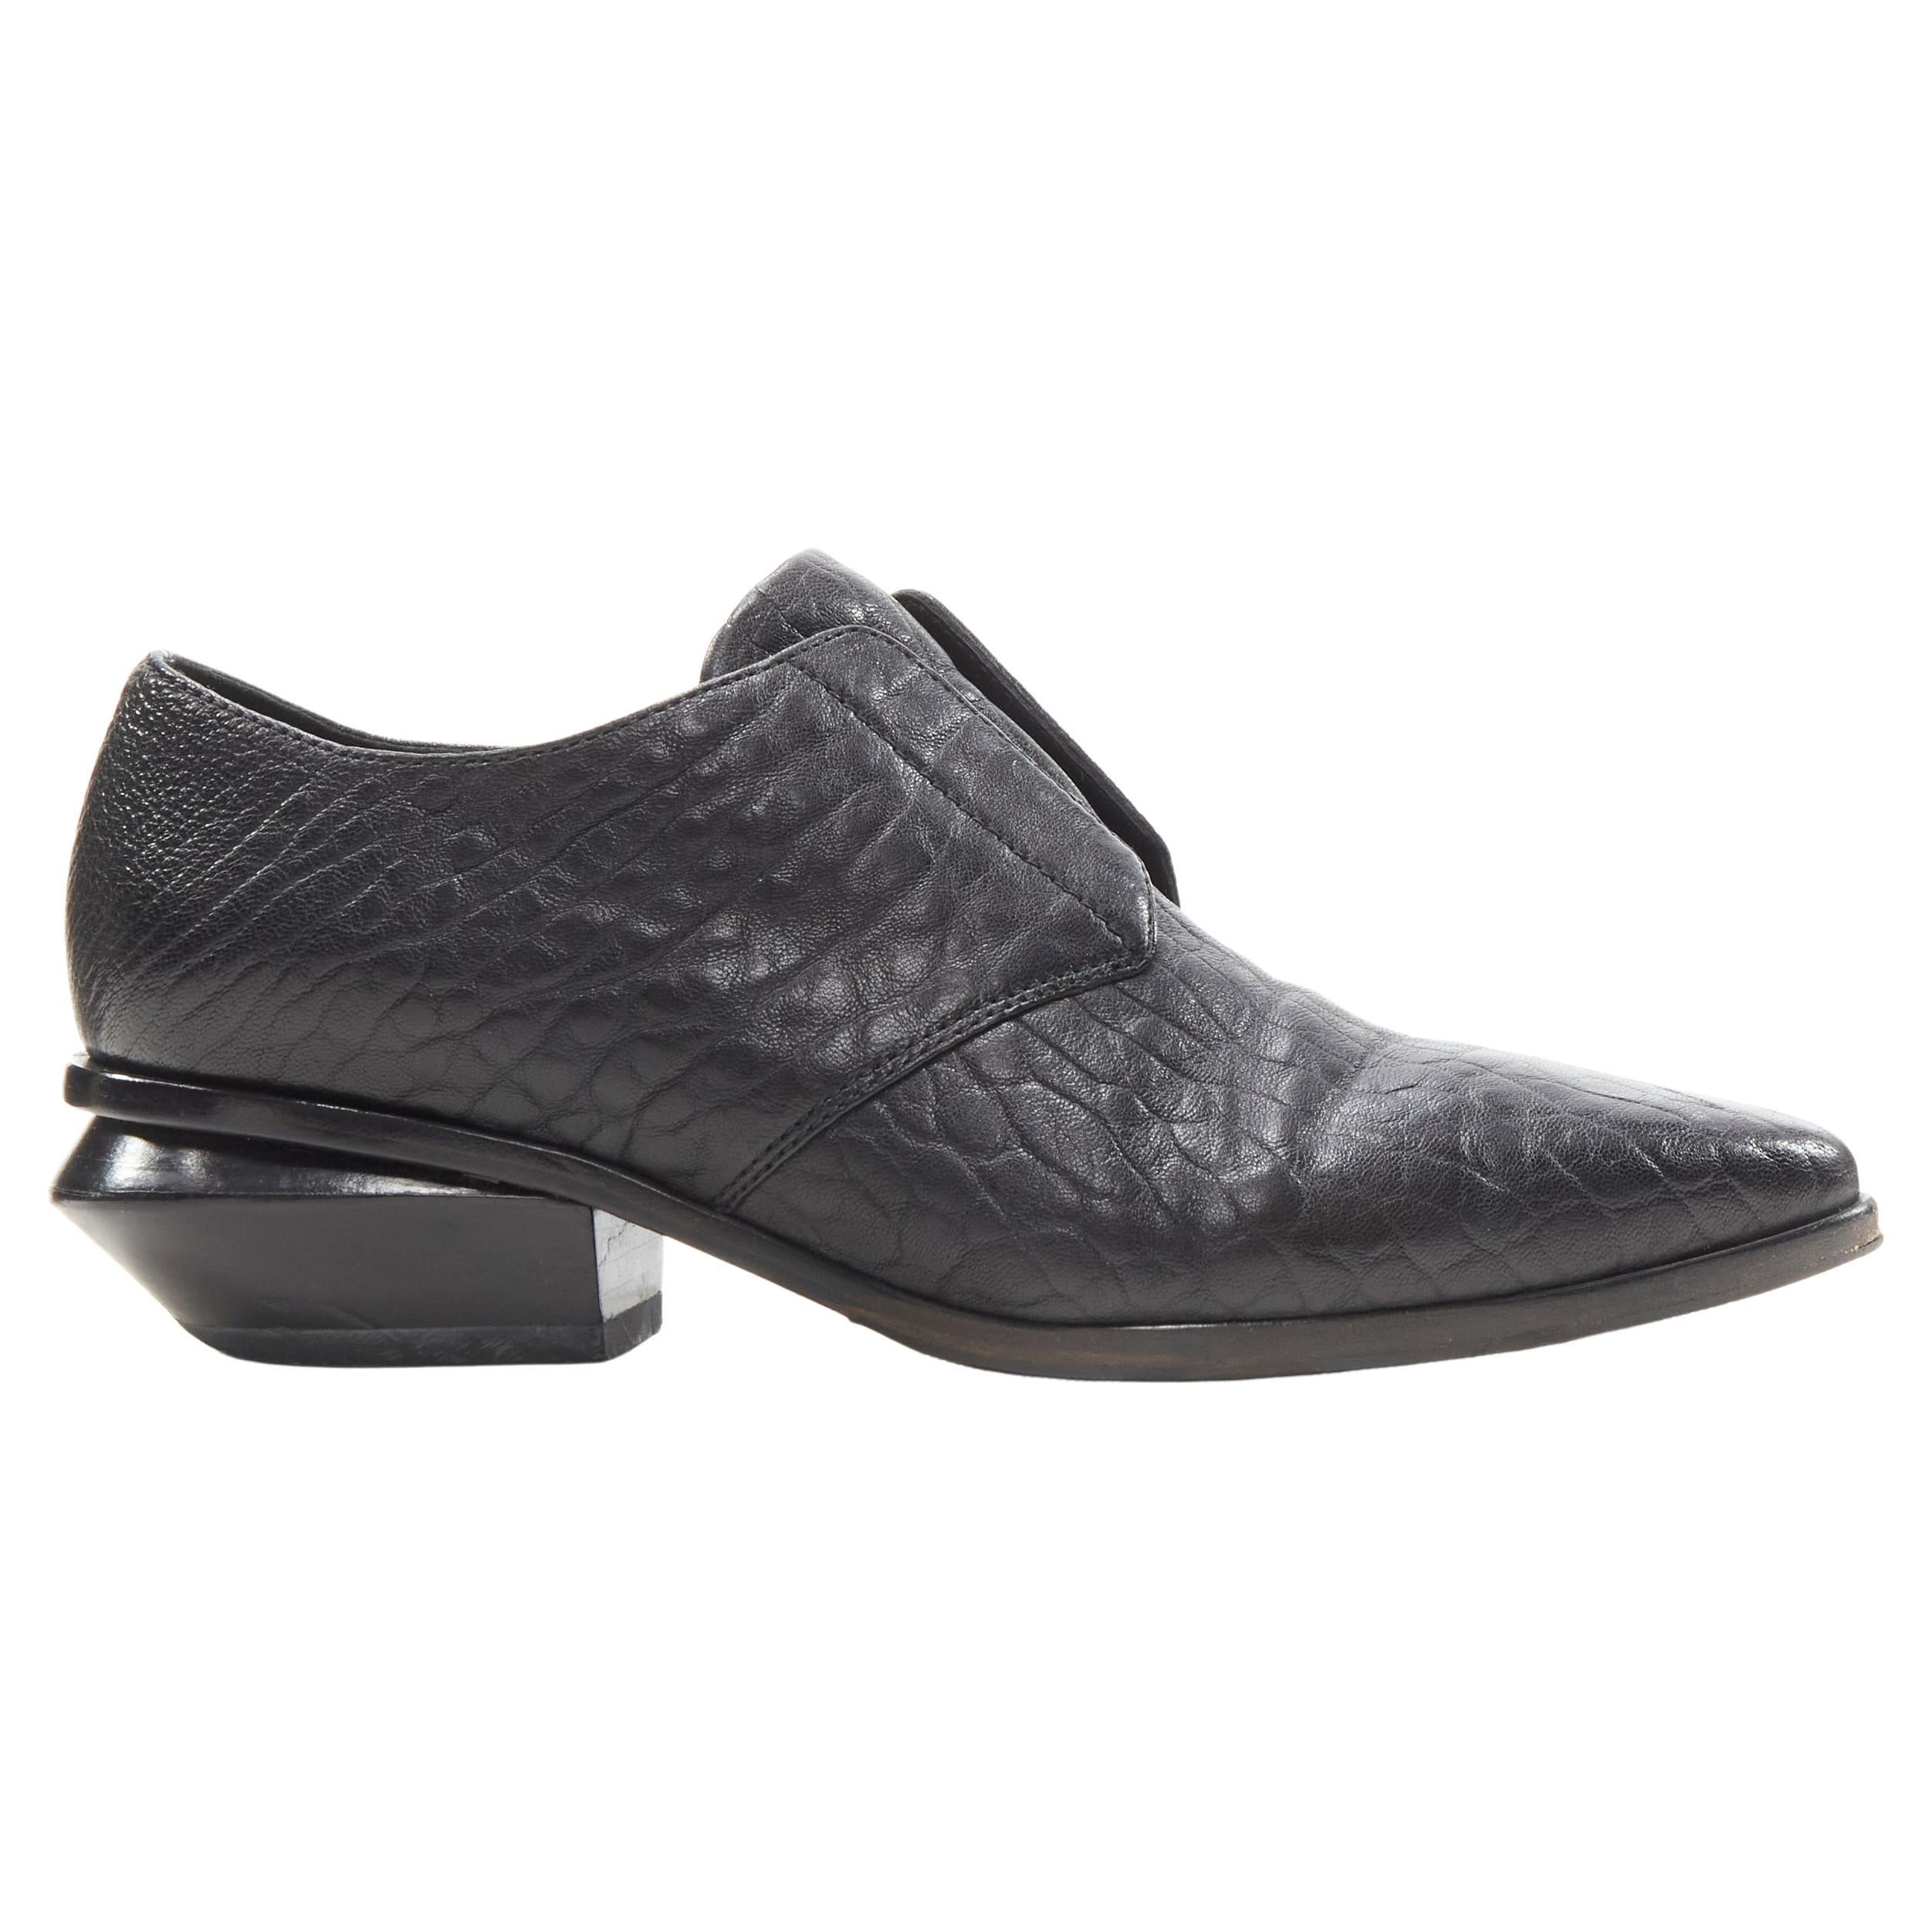 ALEXANDER WANG Ines Oxford black leather laceless brogue EU37 For Sale